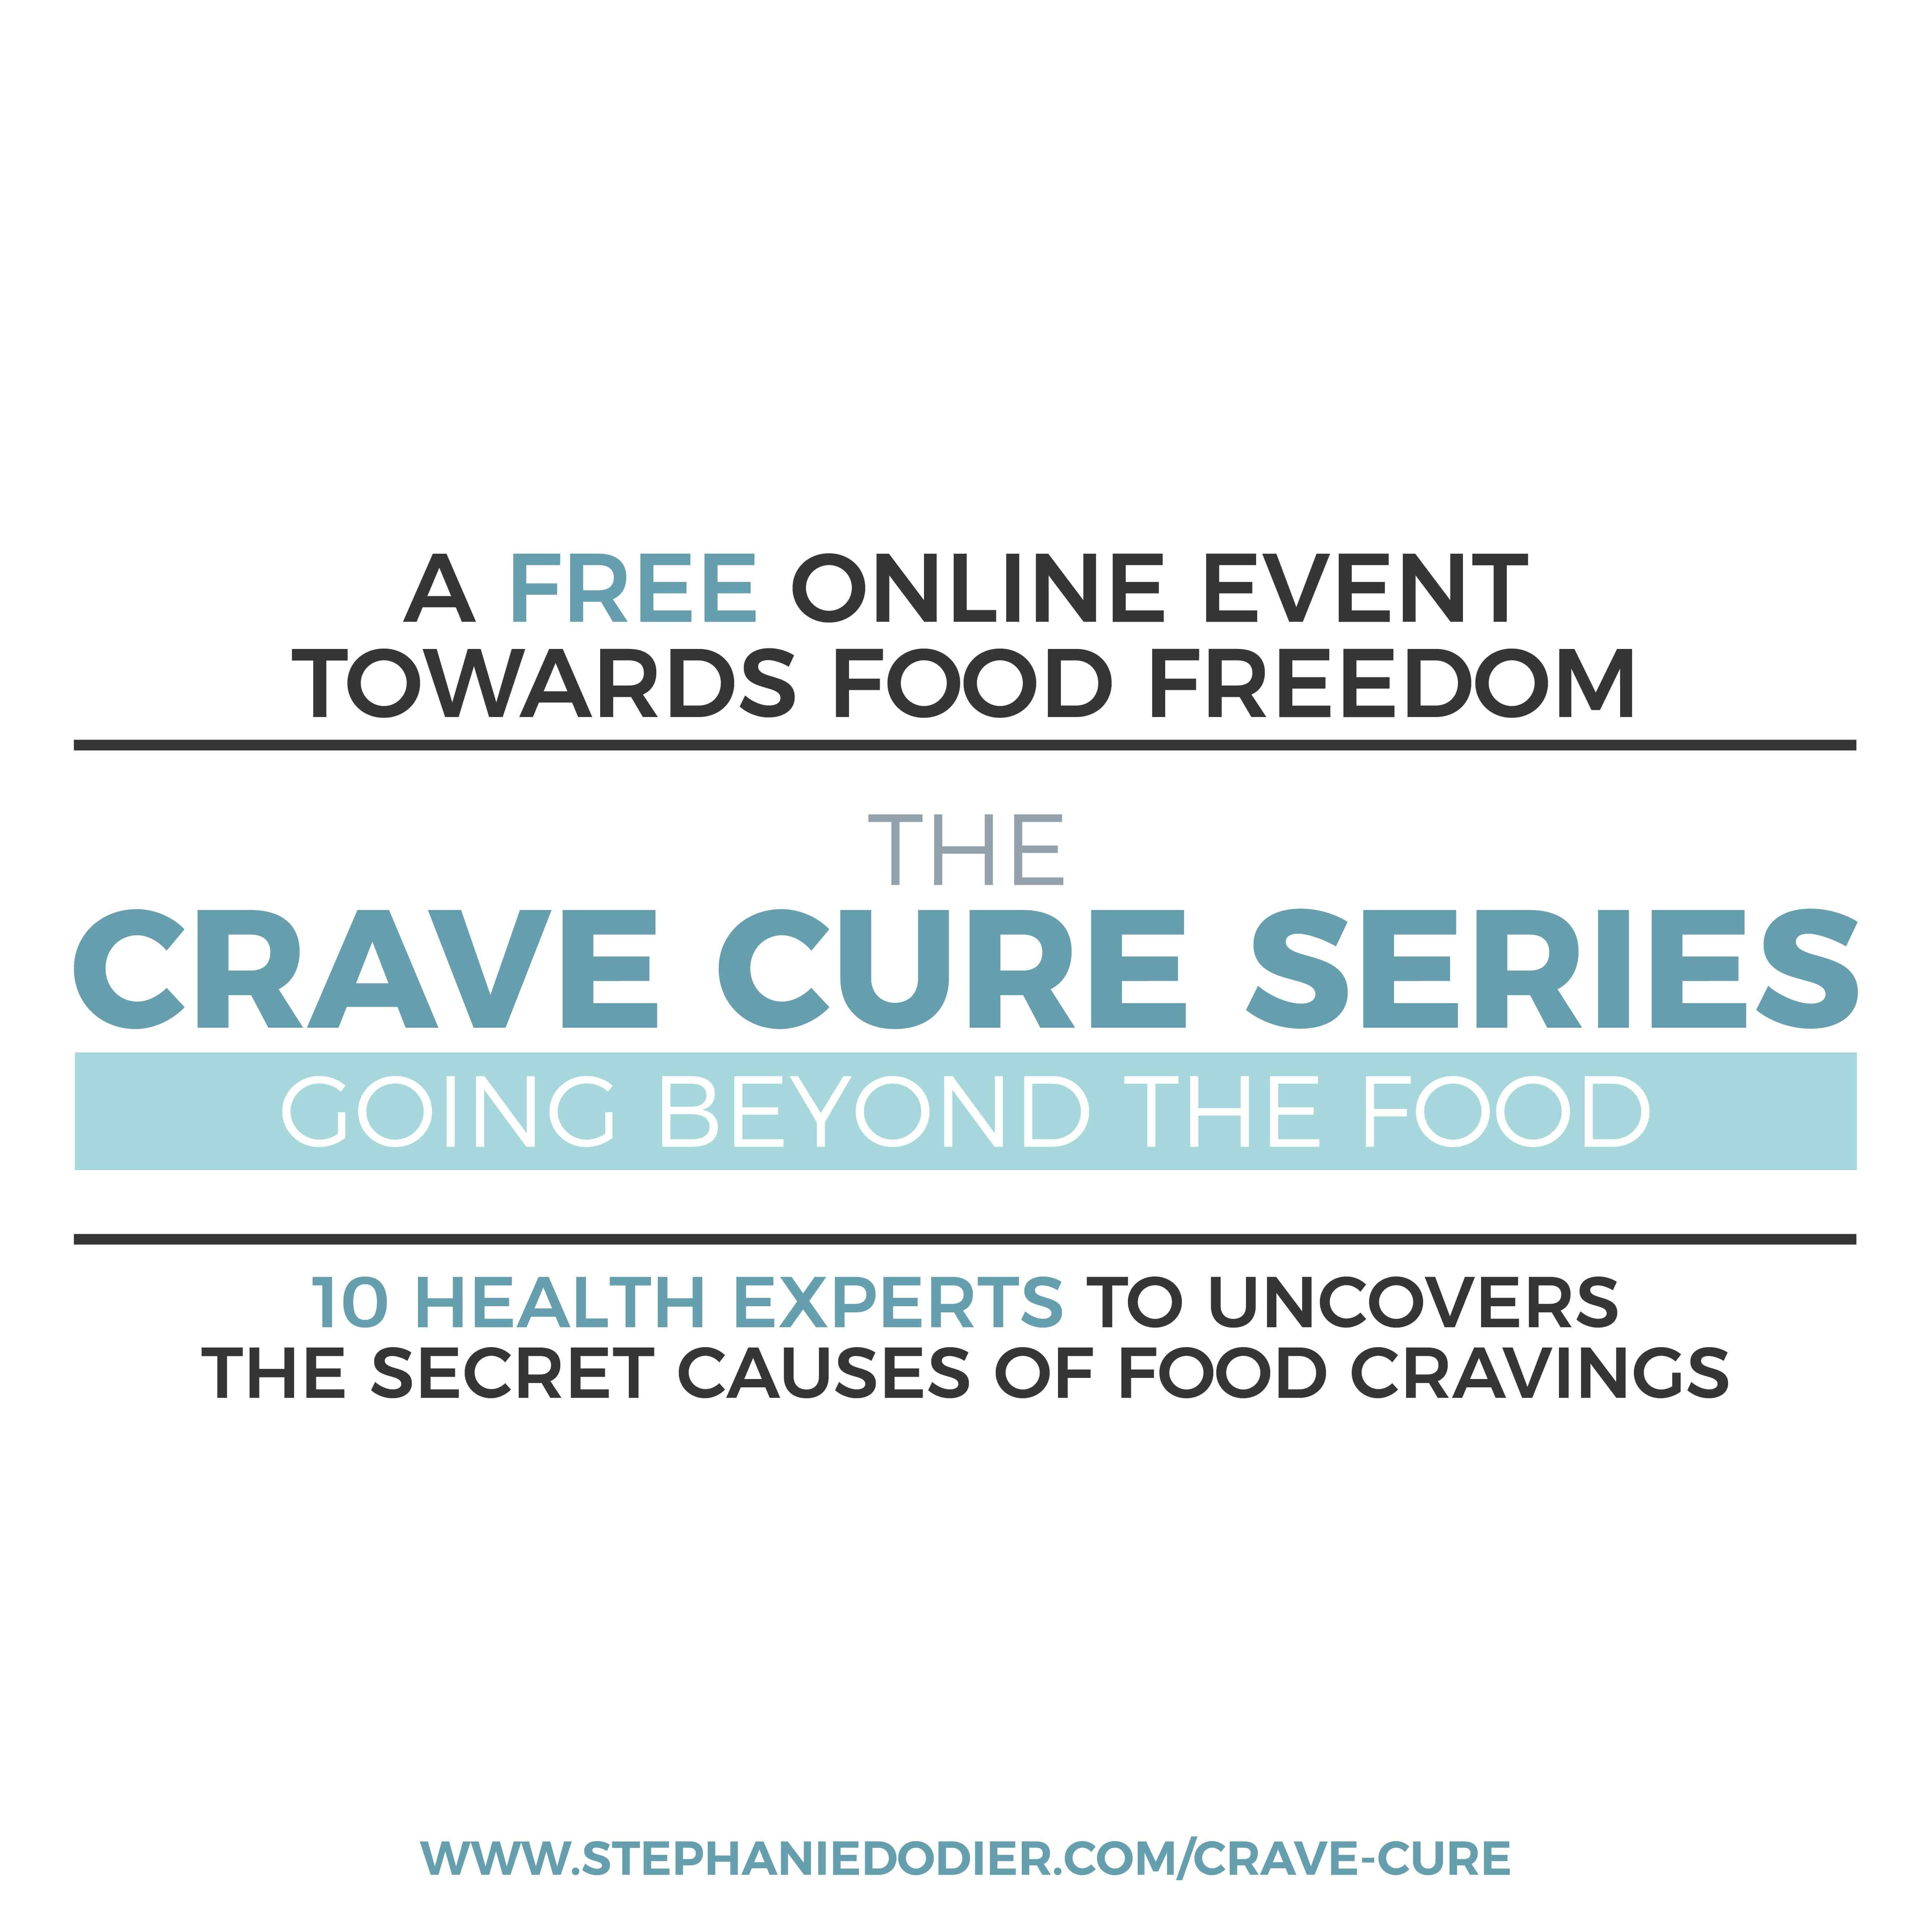 the crave cure series and guide